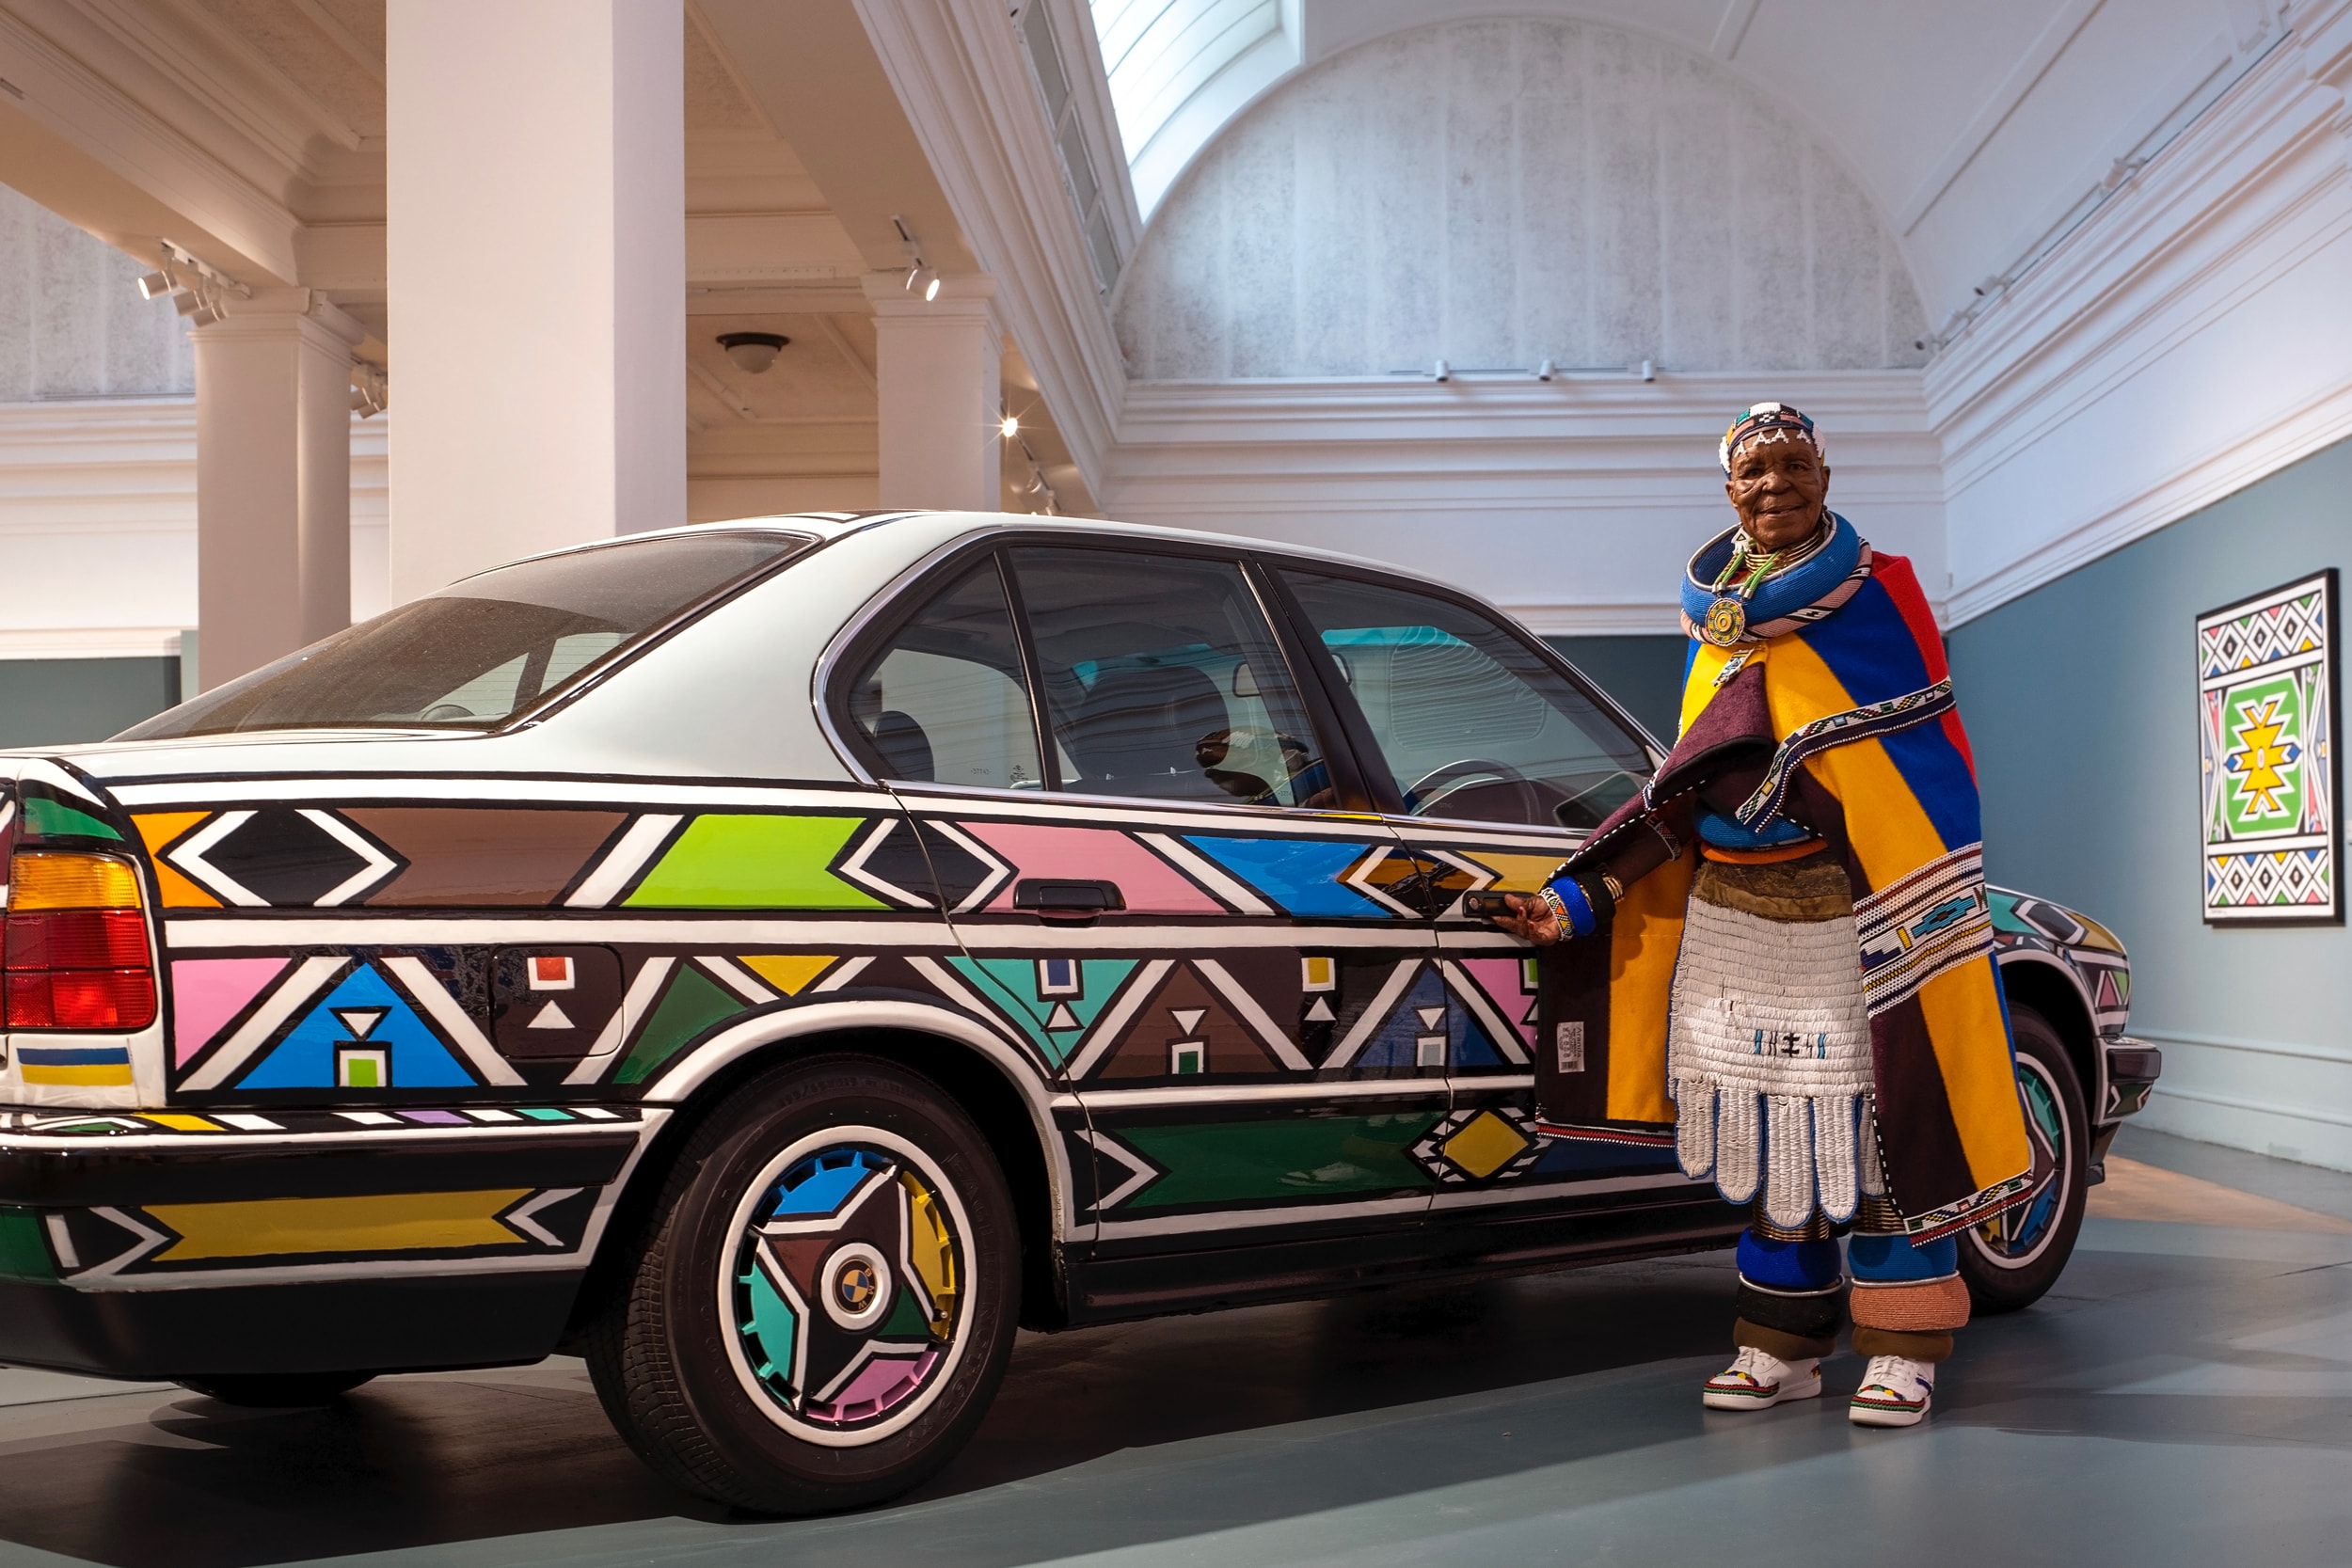 Then I Knew I Was Good at Painting: Esther Mahlangu bmw exhibition iziko museums of south africa